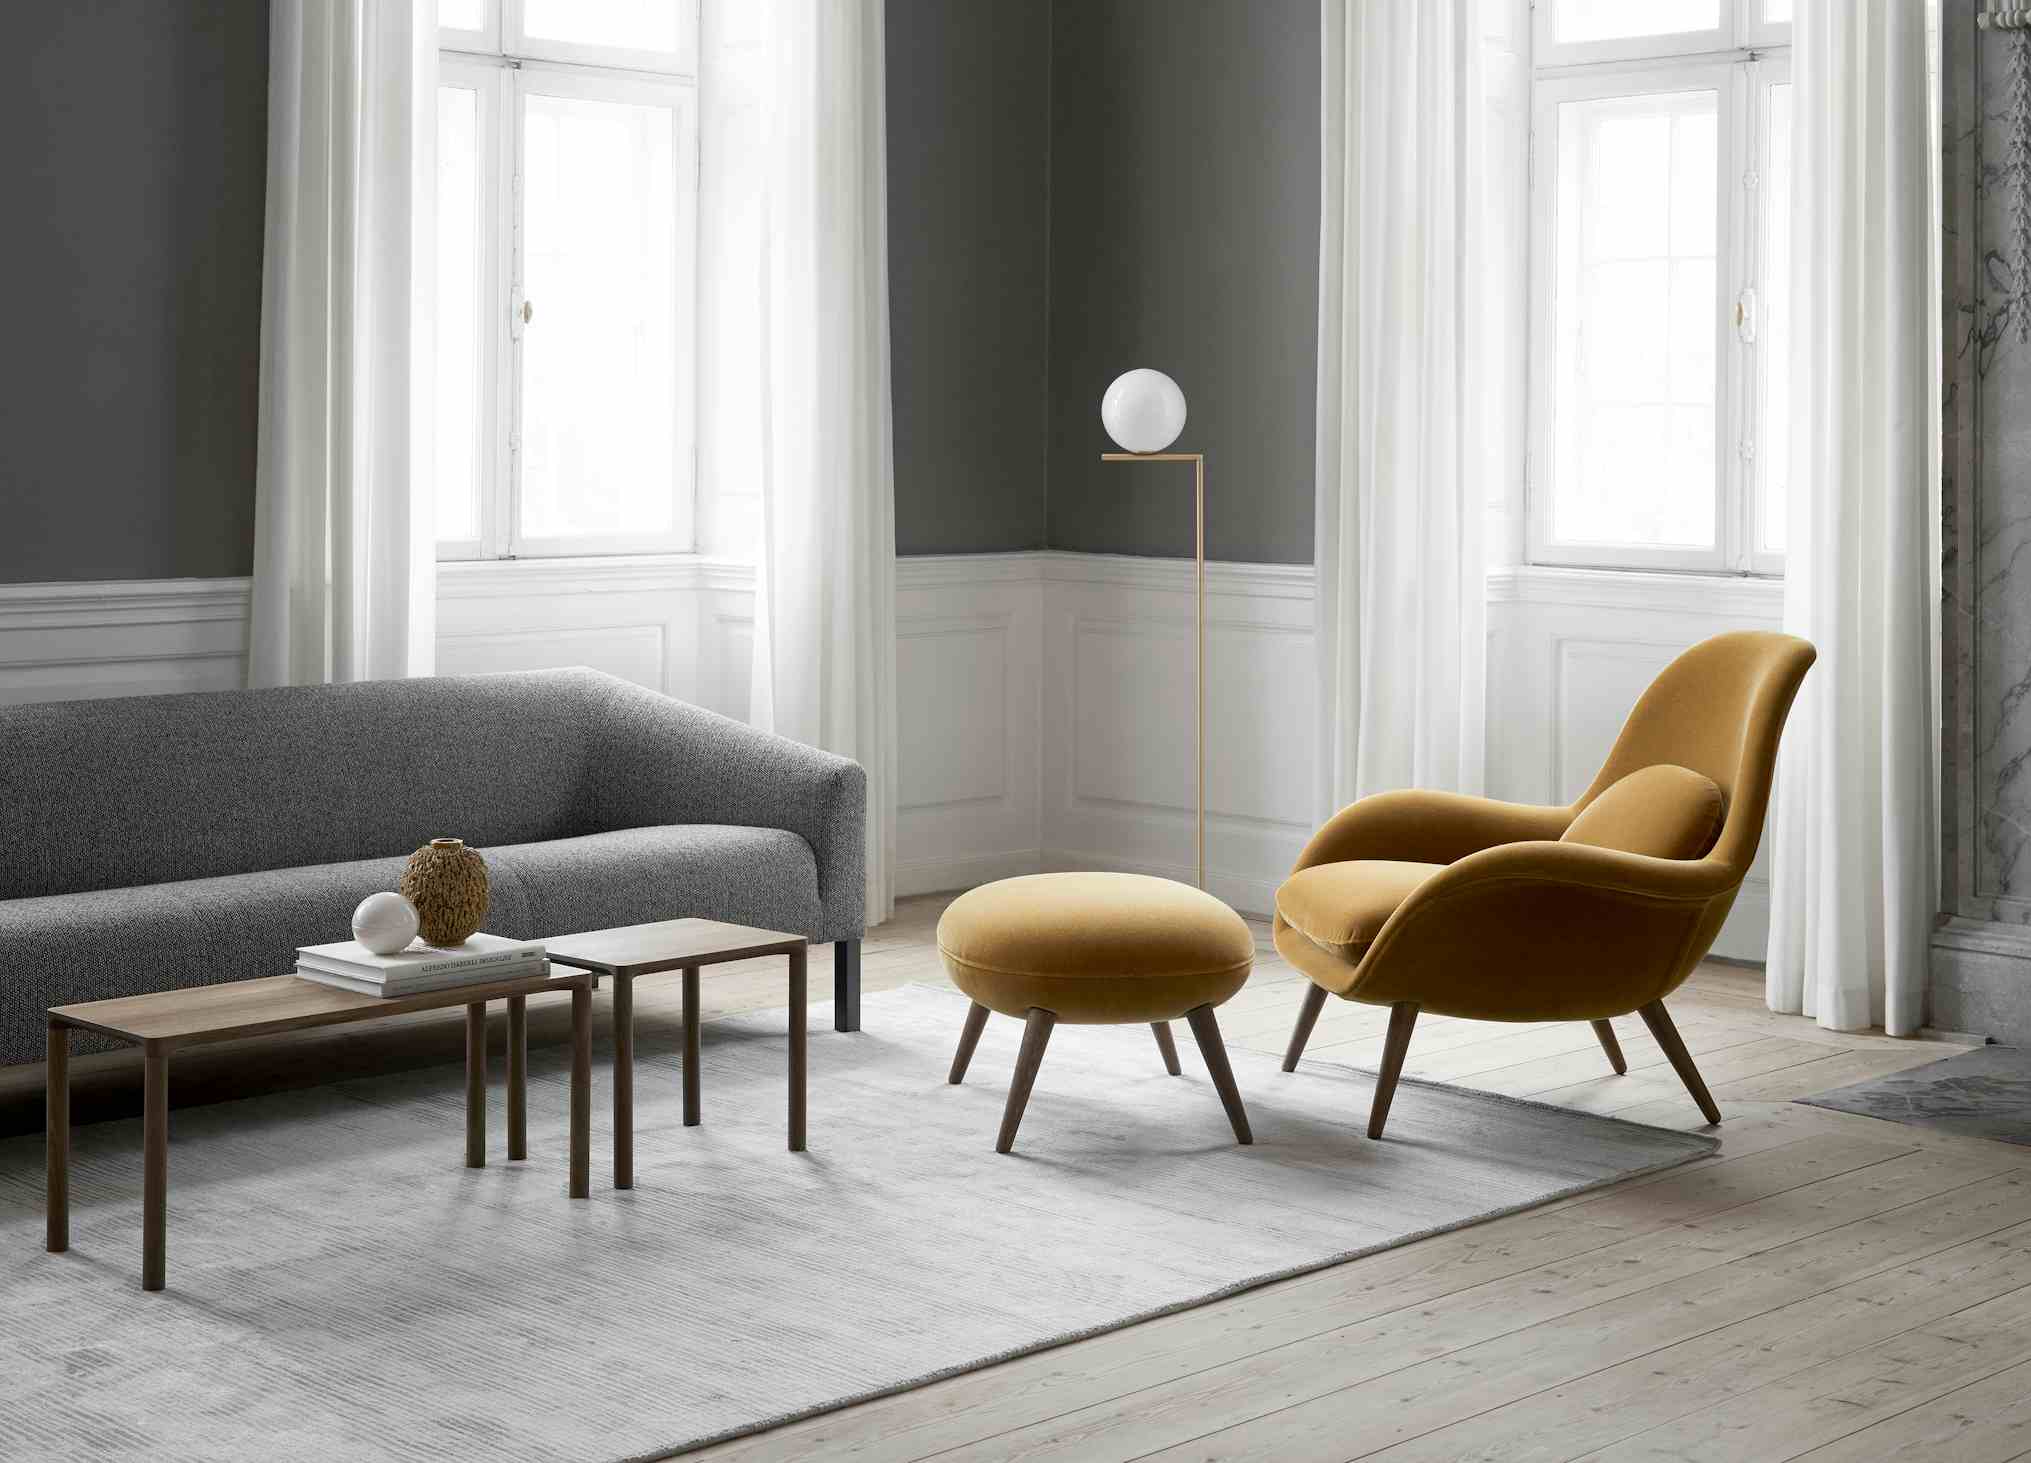 Fredericia-swoon-chair-insitu-yellow-haute-living